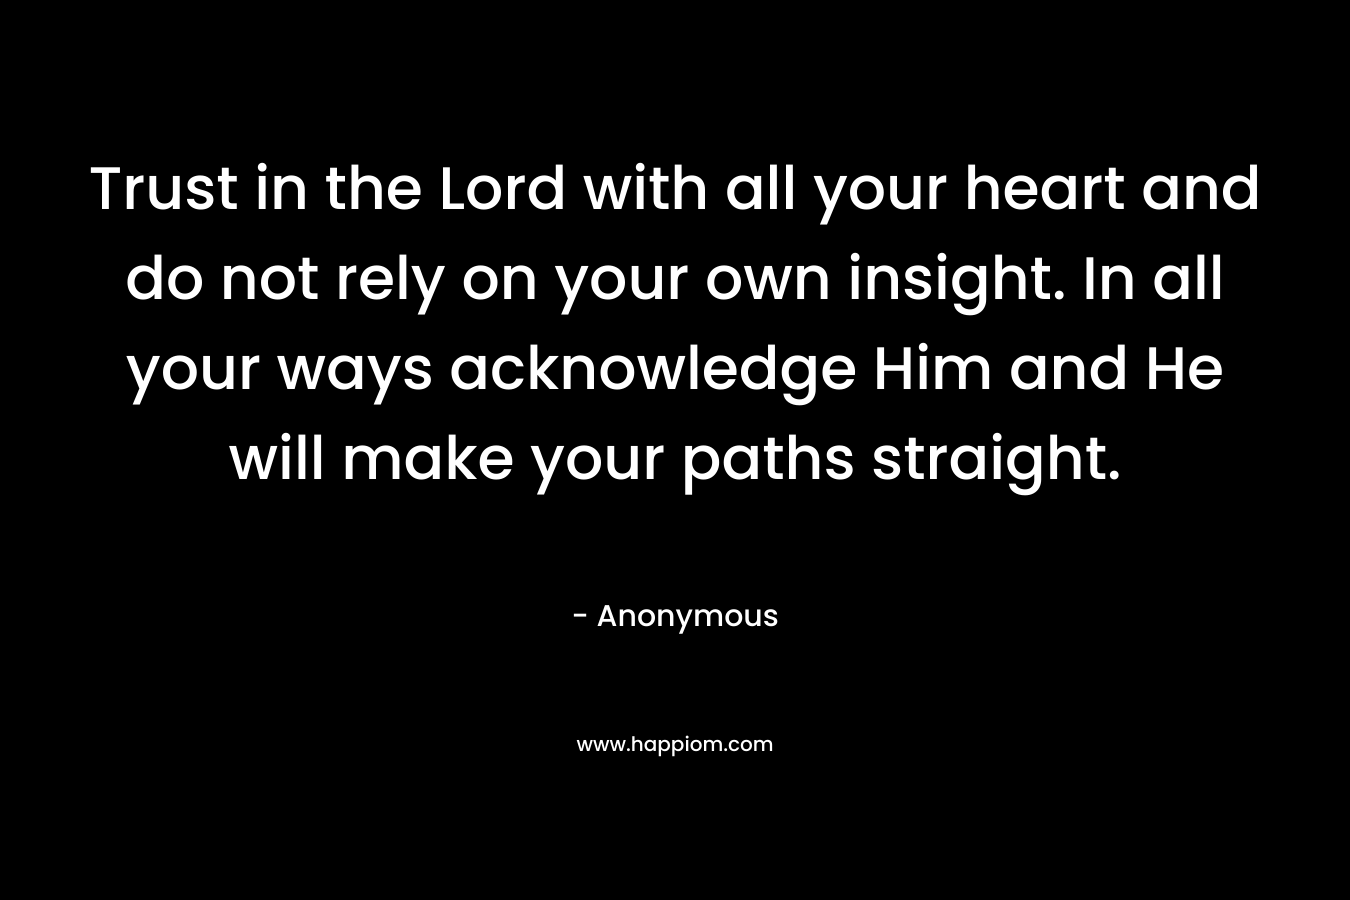 Trust in the Lord with all your heart and do not rely on your own insight. In all your ways acknowledge Him and He will make your paths straight.